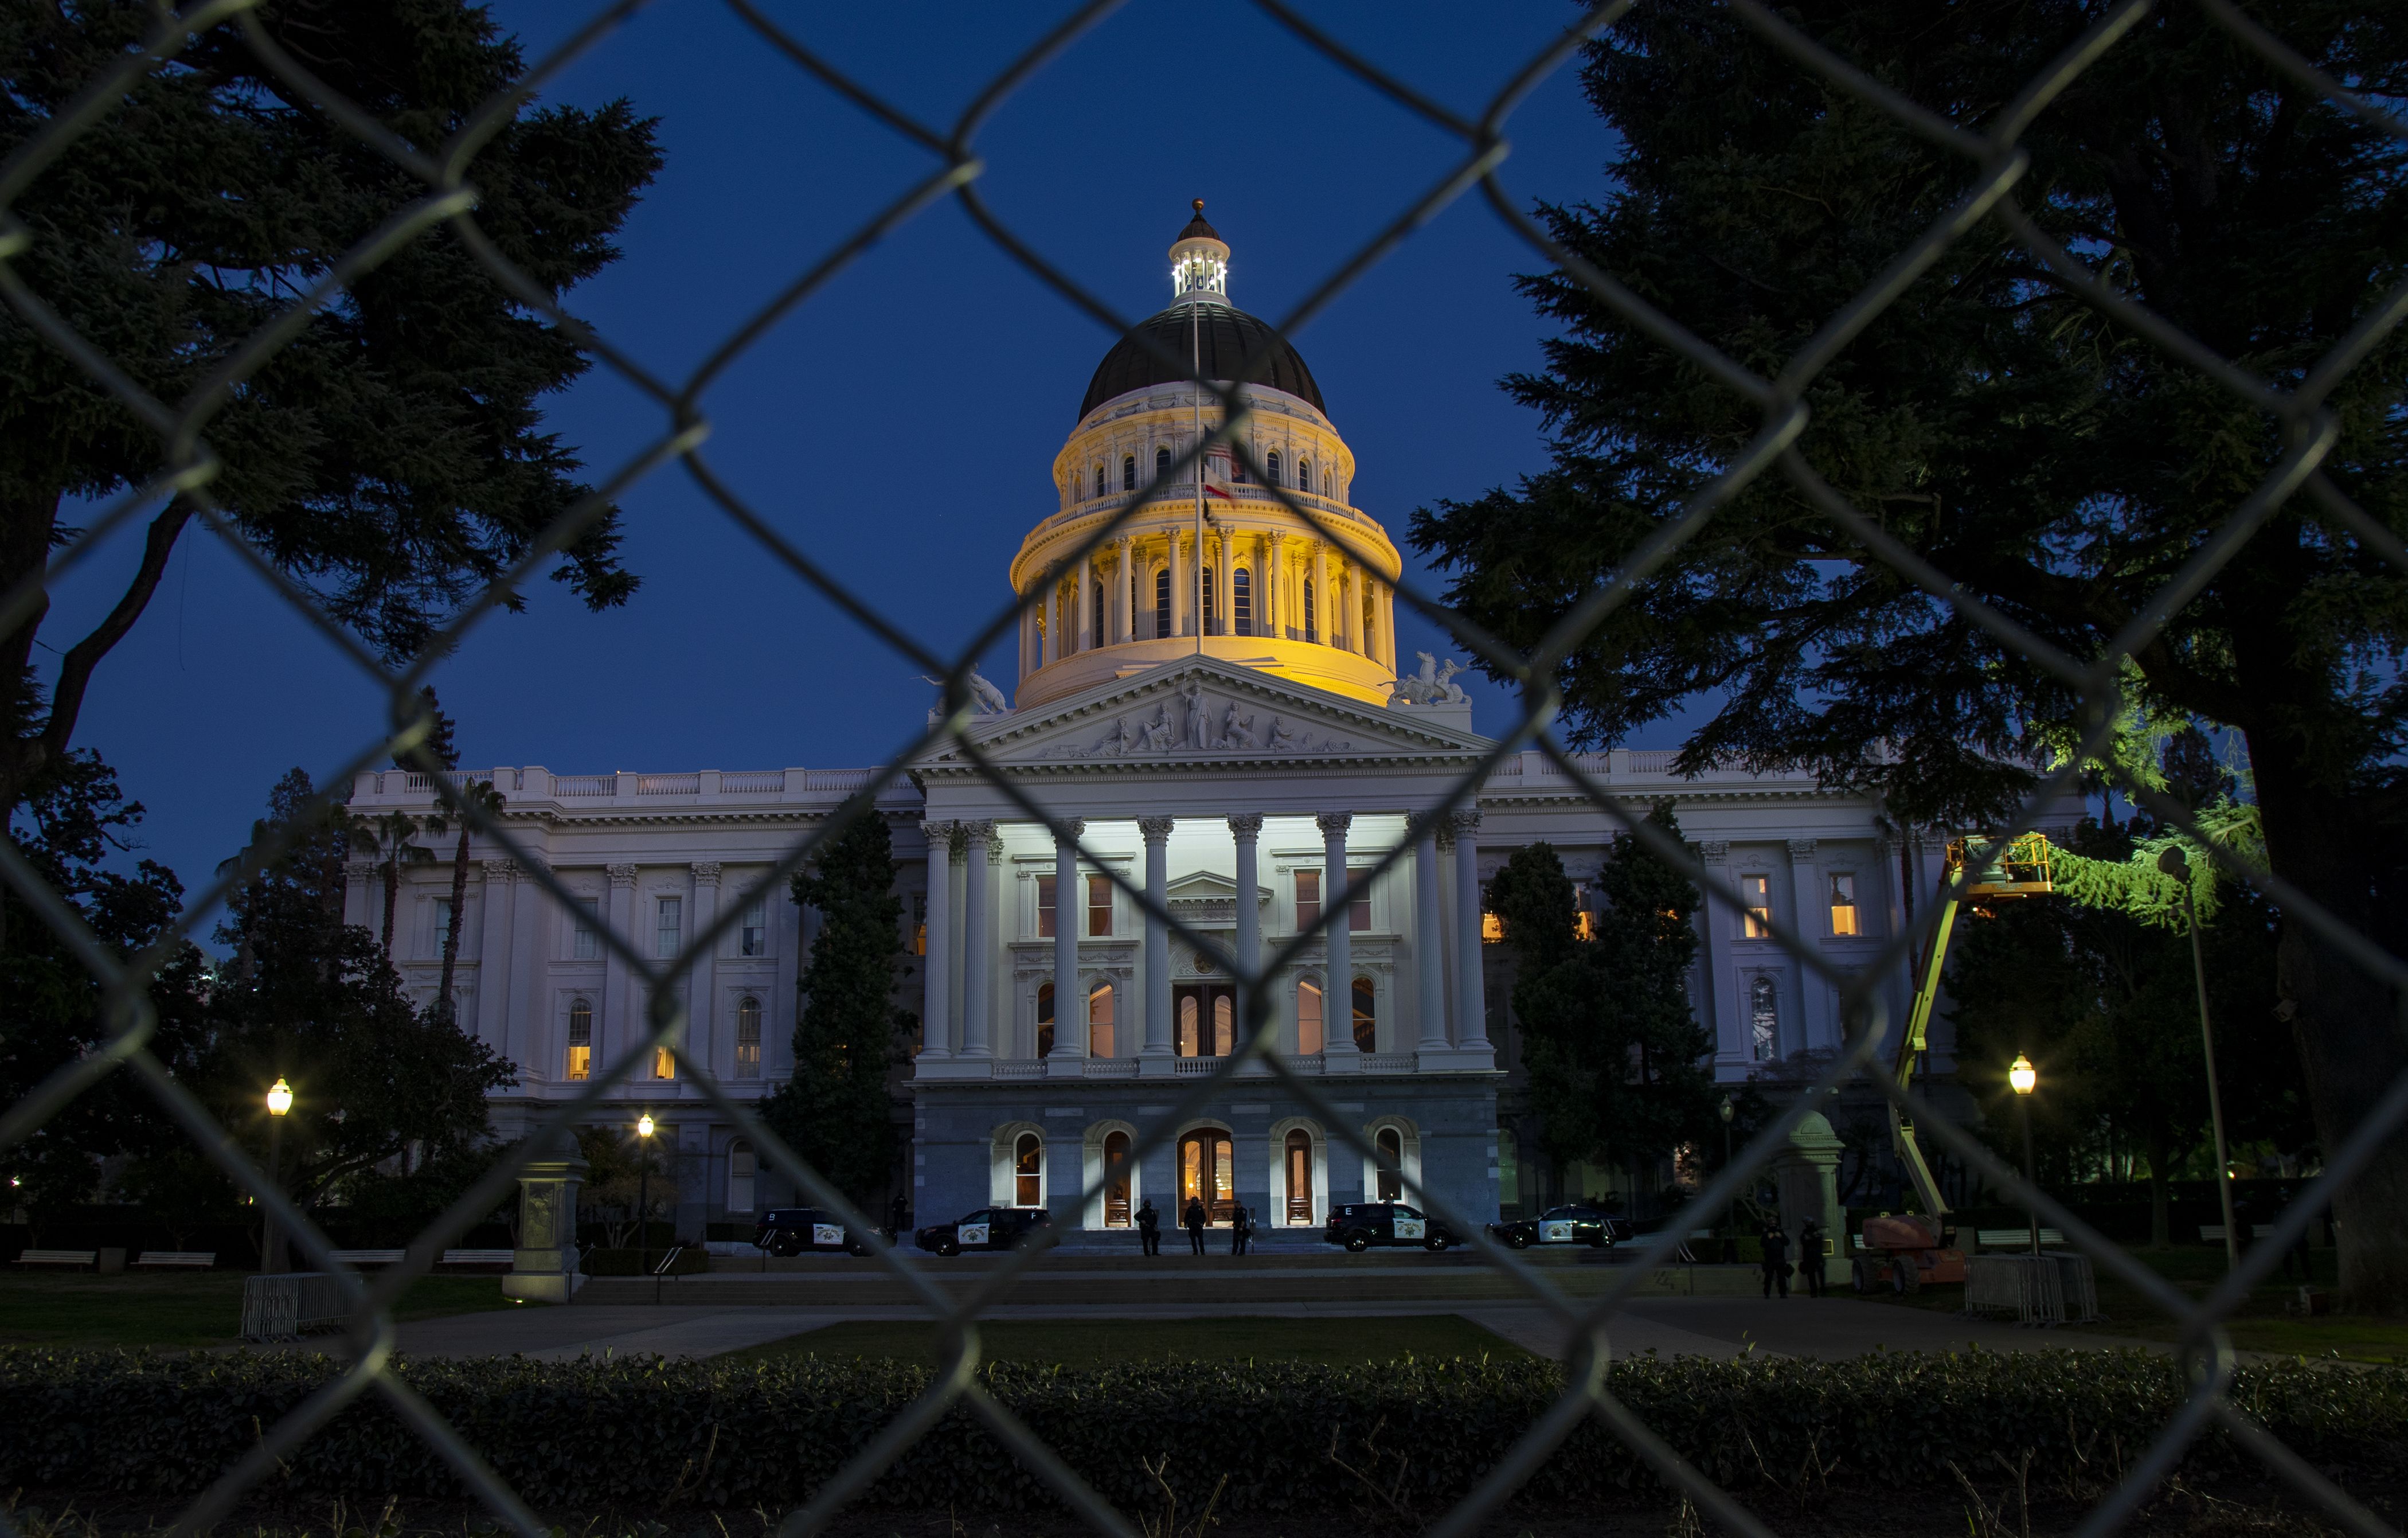 The California State Capitol dome was lit to memorialize lives lost to Covid as CHP officers and the National Guard continue to guard the perimeter on January 19, 2021 in Sacramento